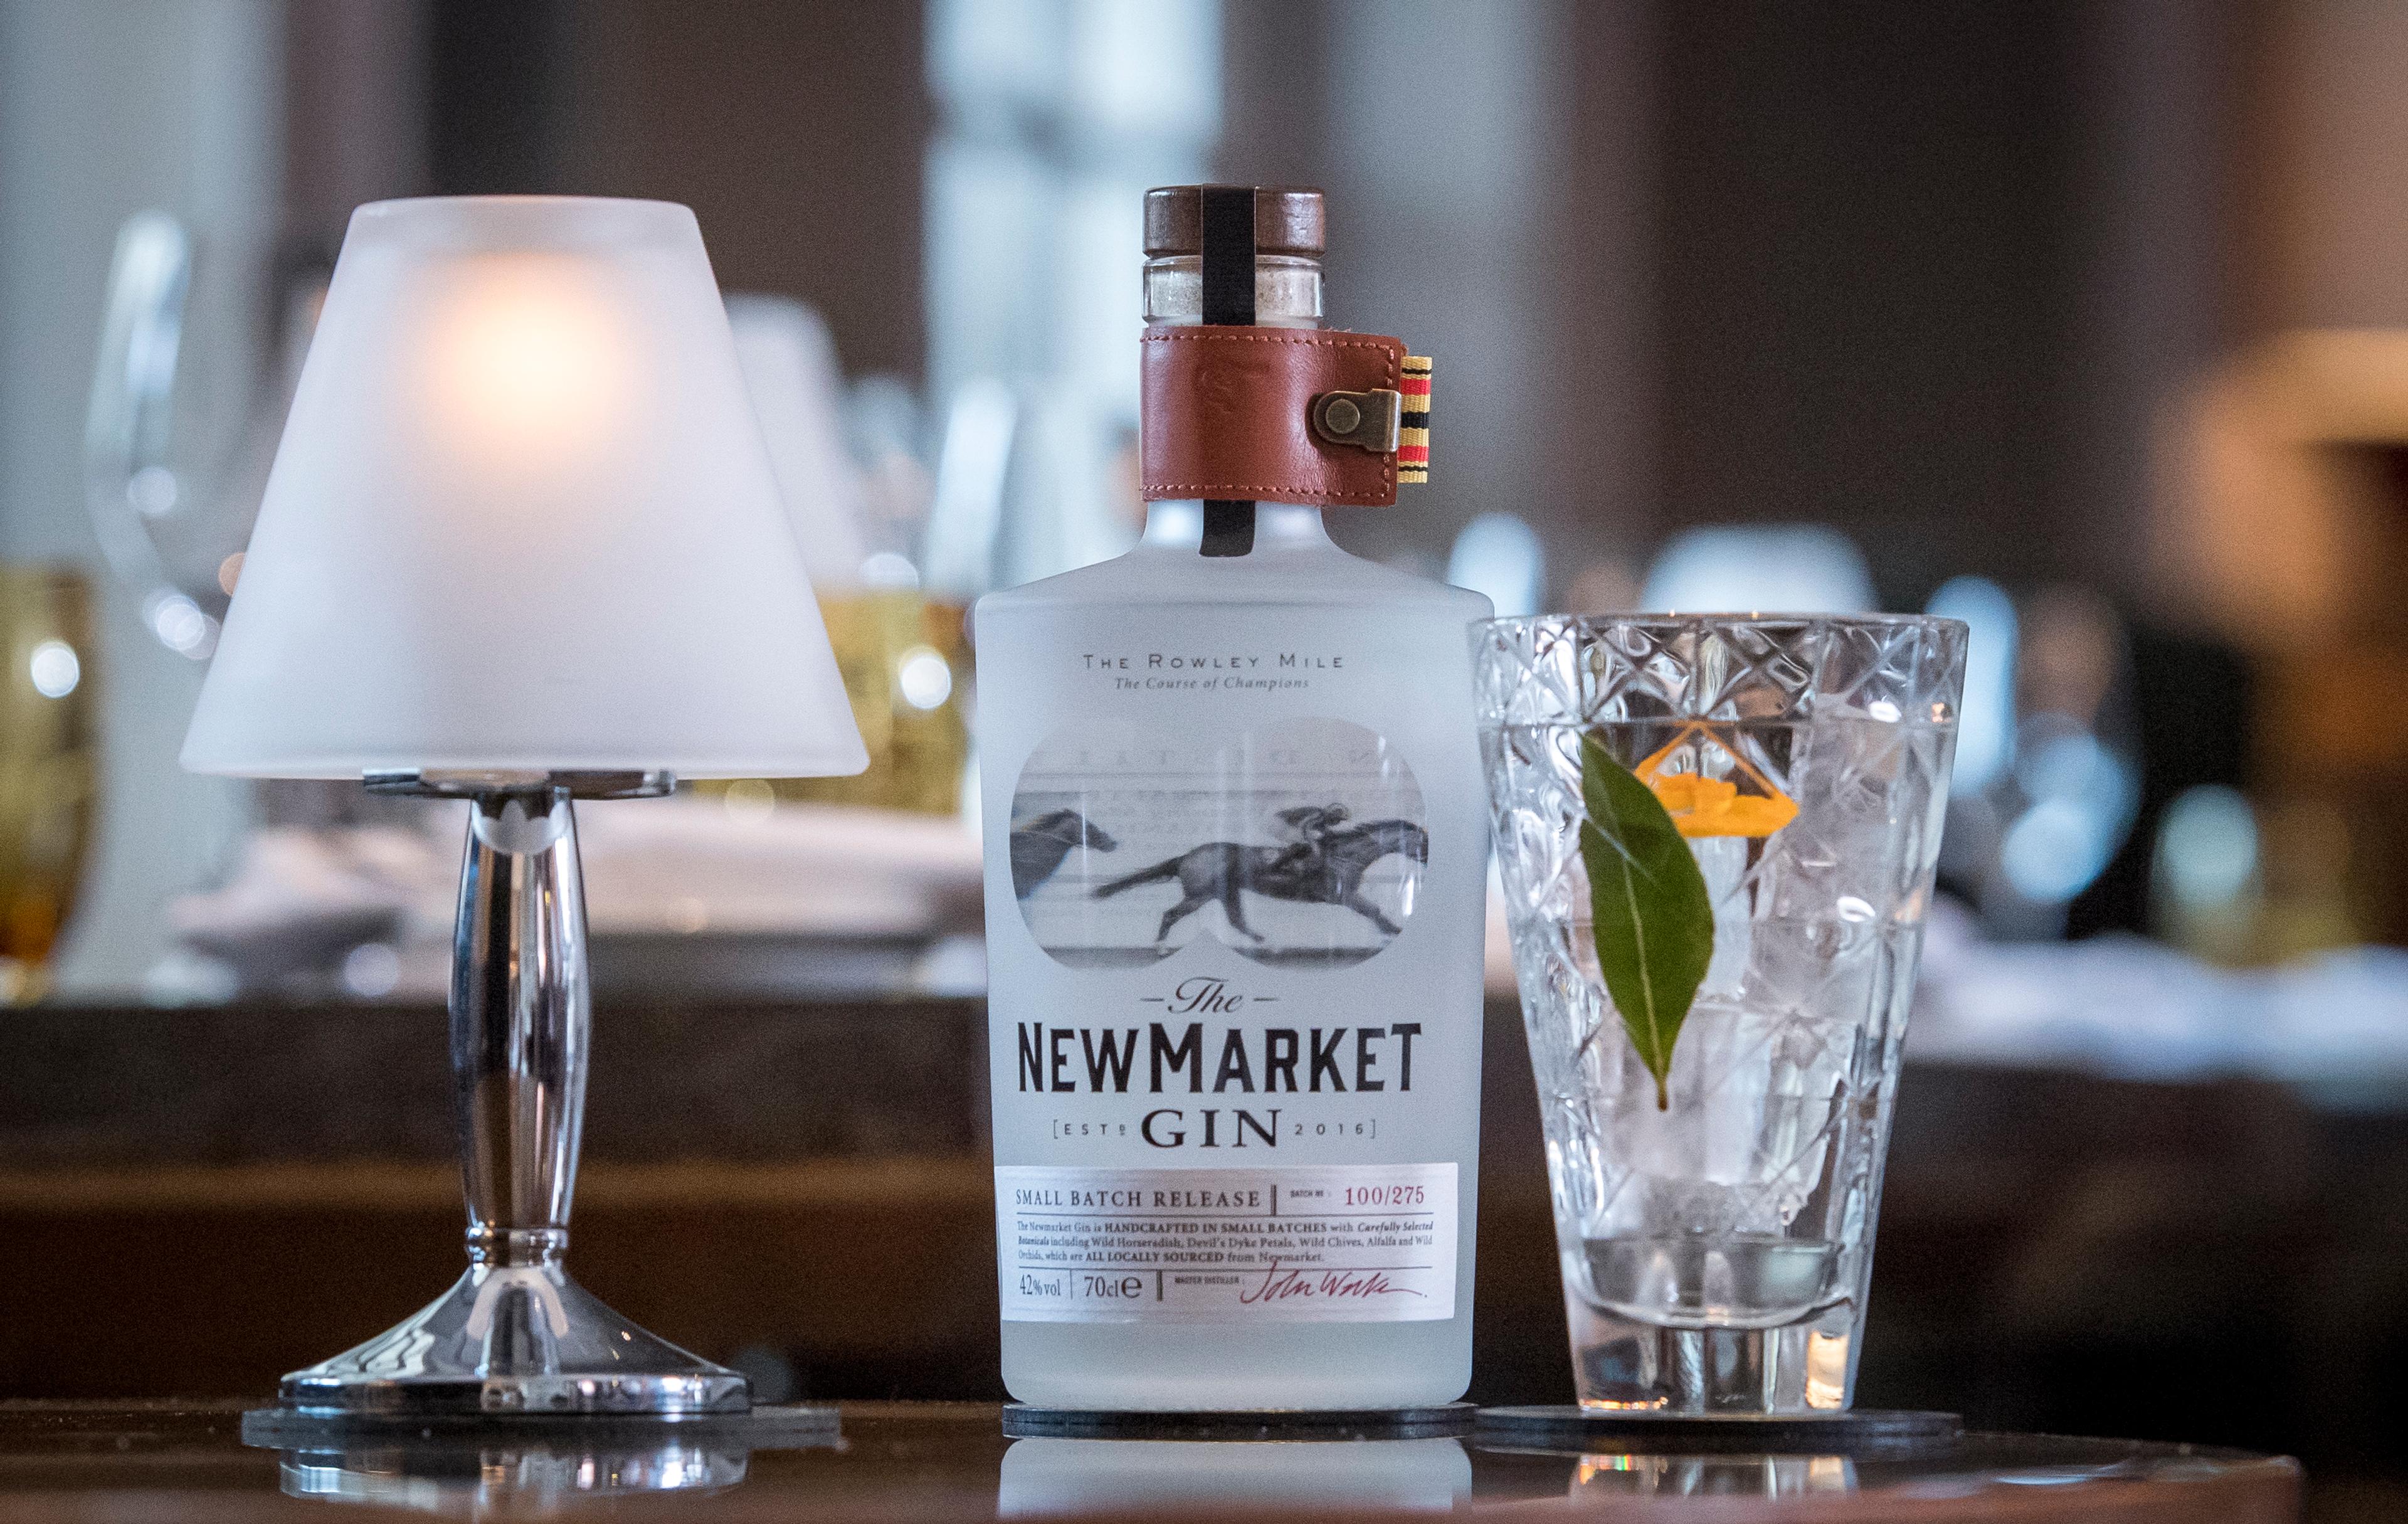 Newmarket gin served at the Bedford Lodge Hotel and Spa